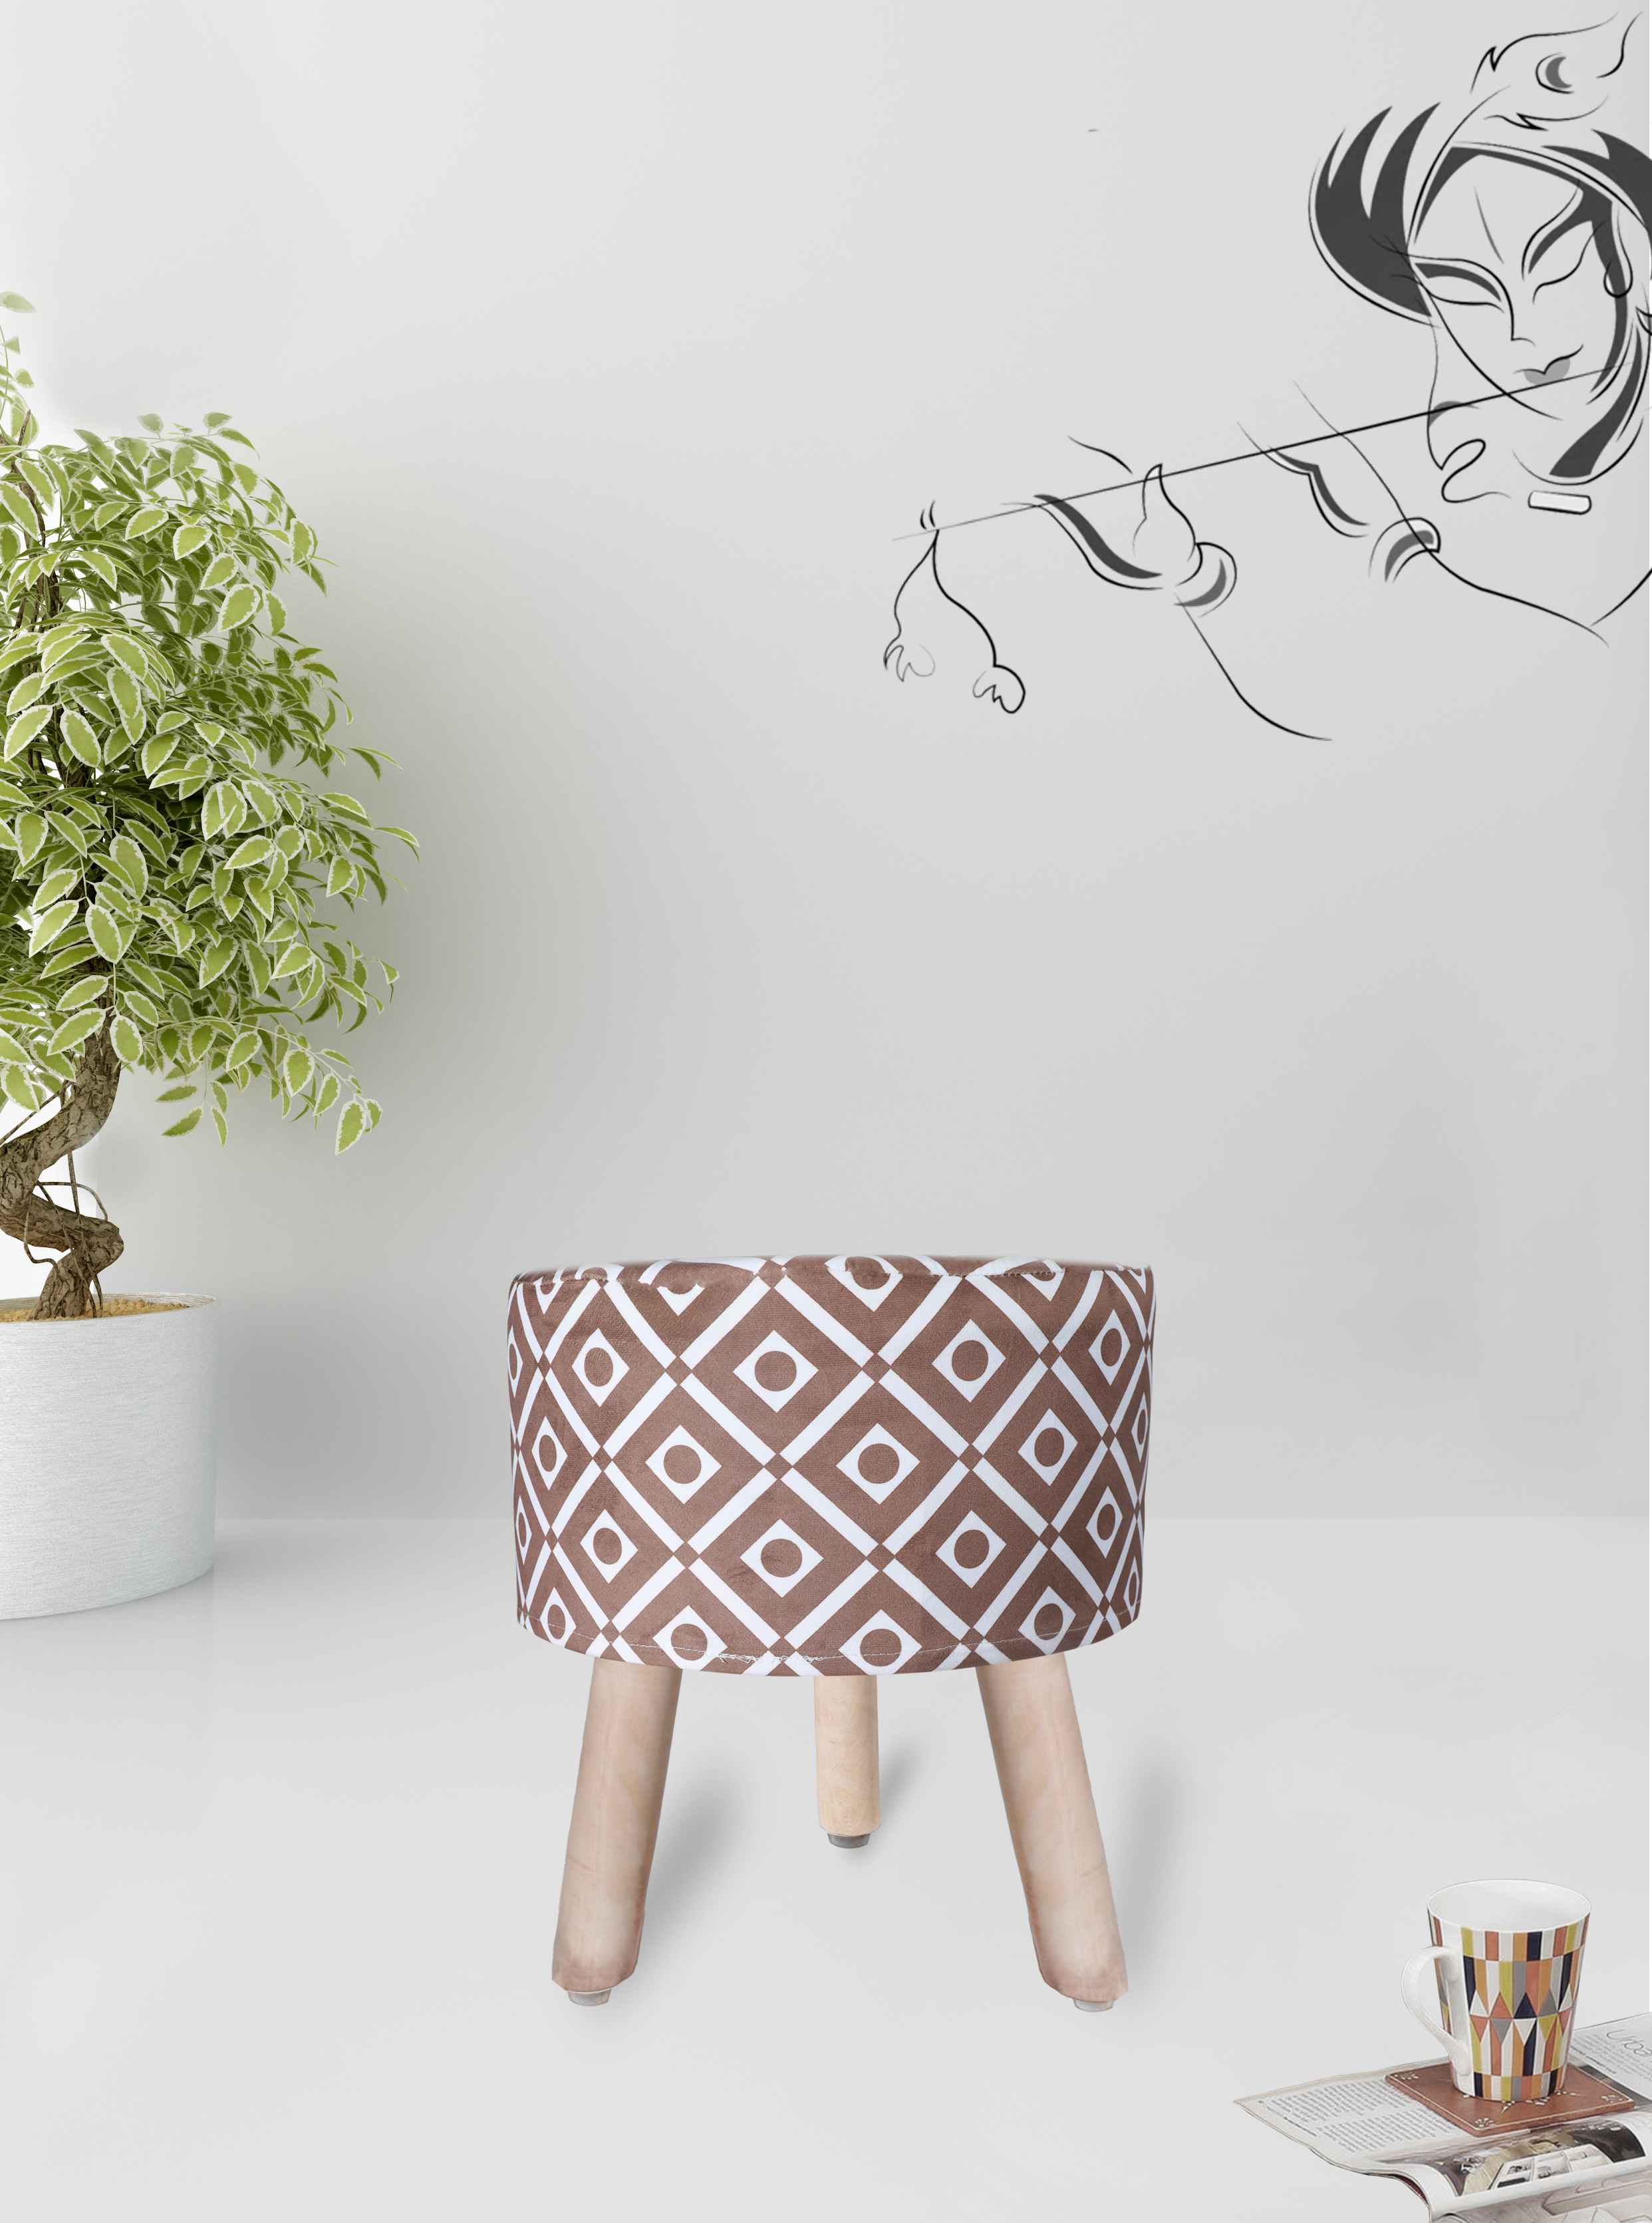 Patterned Paragon Ottomans 4